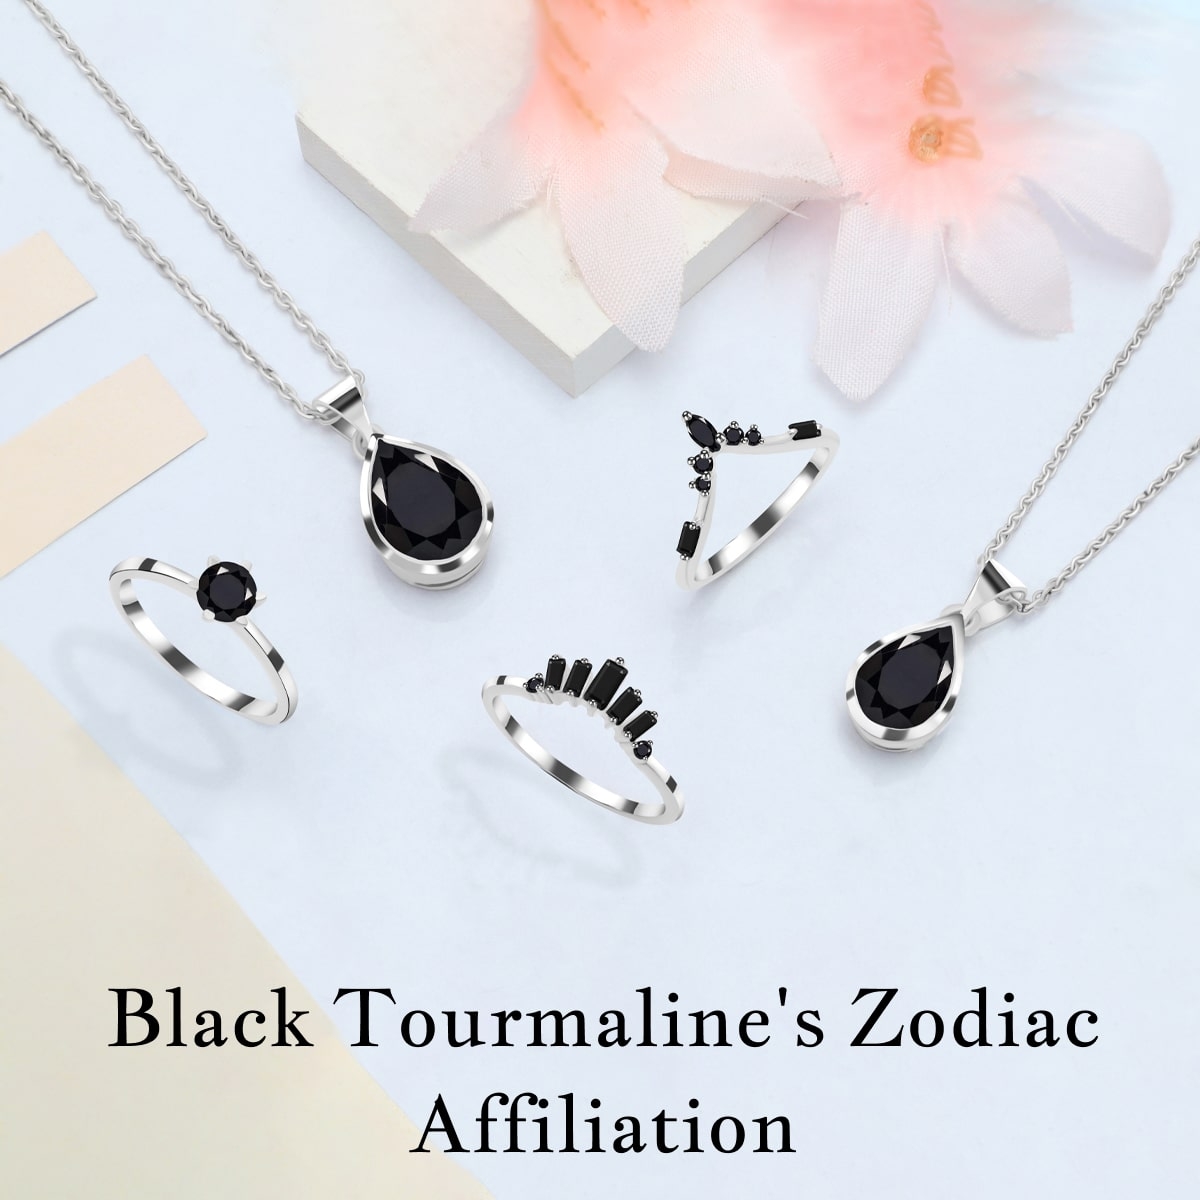 Black Tourmaline is Associated with Which Zodiac Sign